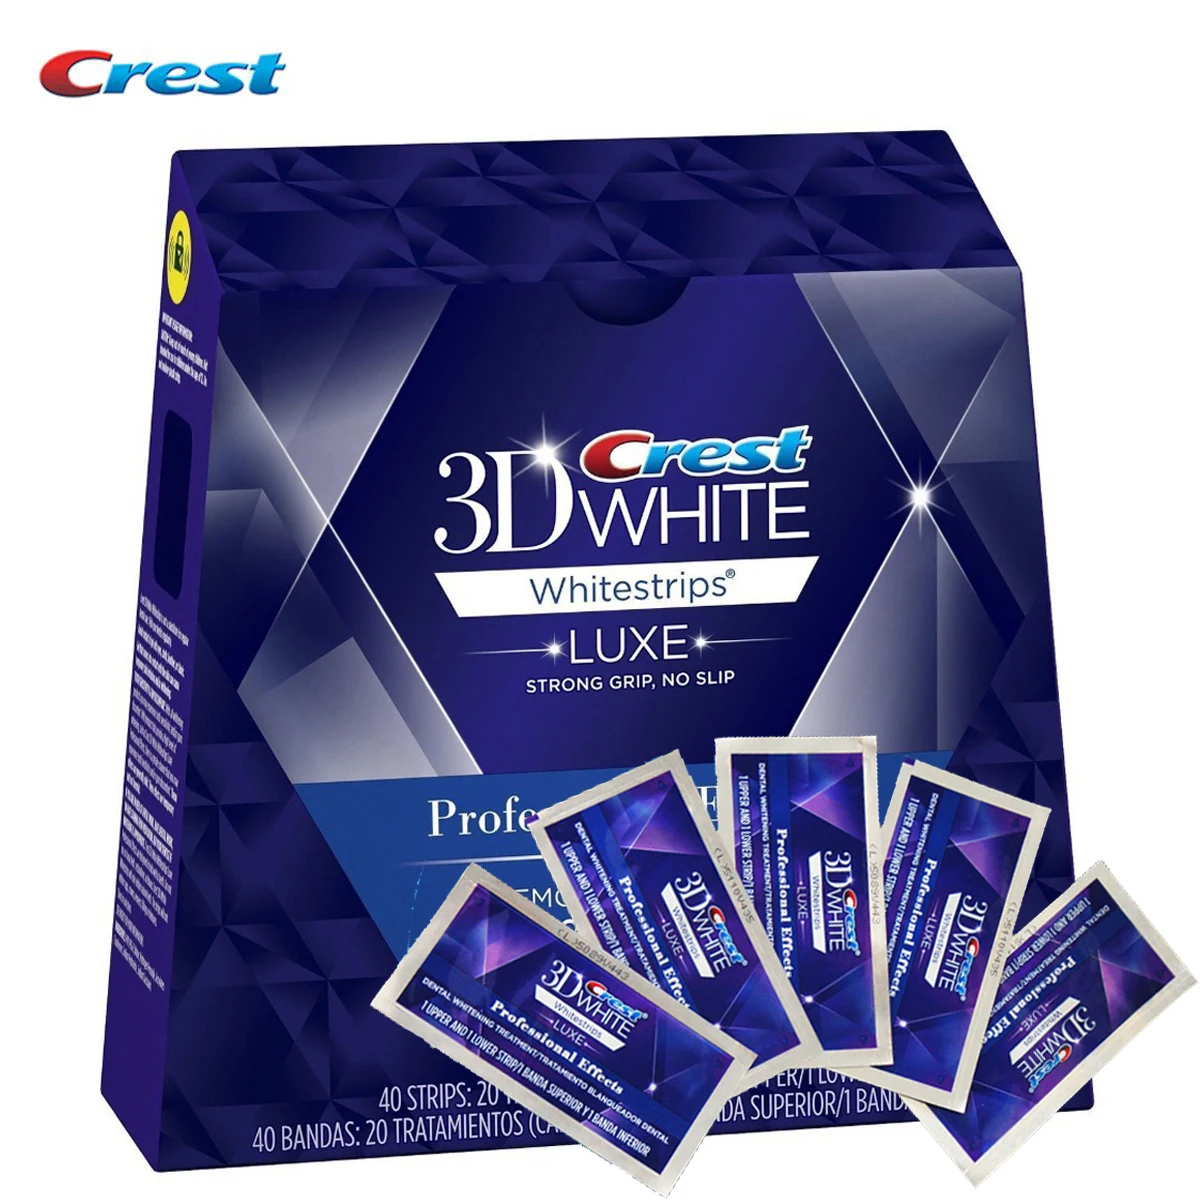 Crest 3D White Whitestrips LUXE Professional Effects Original Oral Hygiene Teeth Whitening